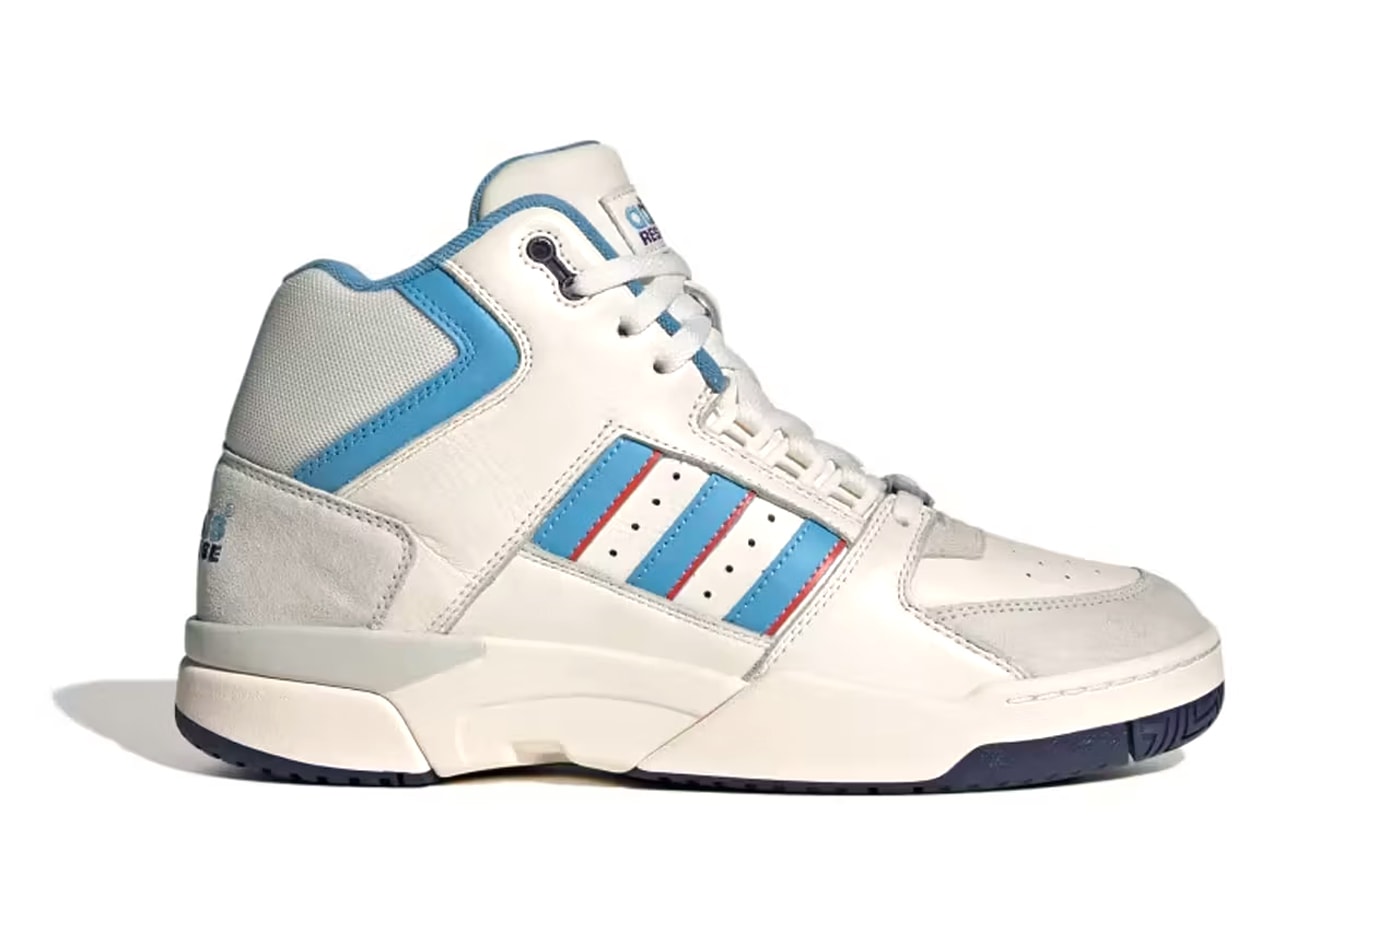 adidas Releases Torsion Response Tennis Mid: “Shoes for the Fun You”